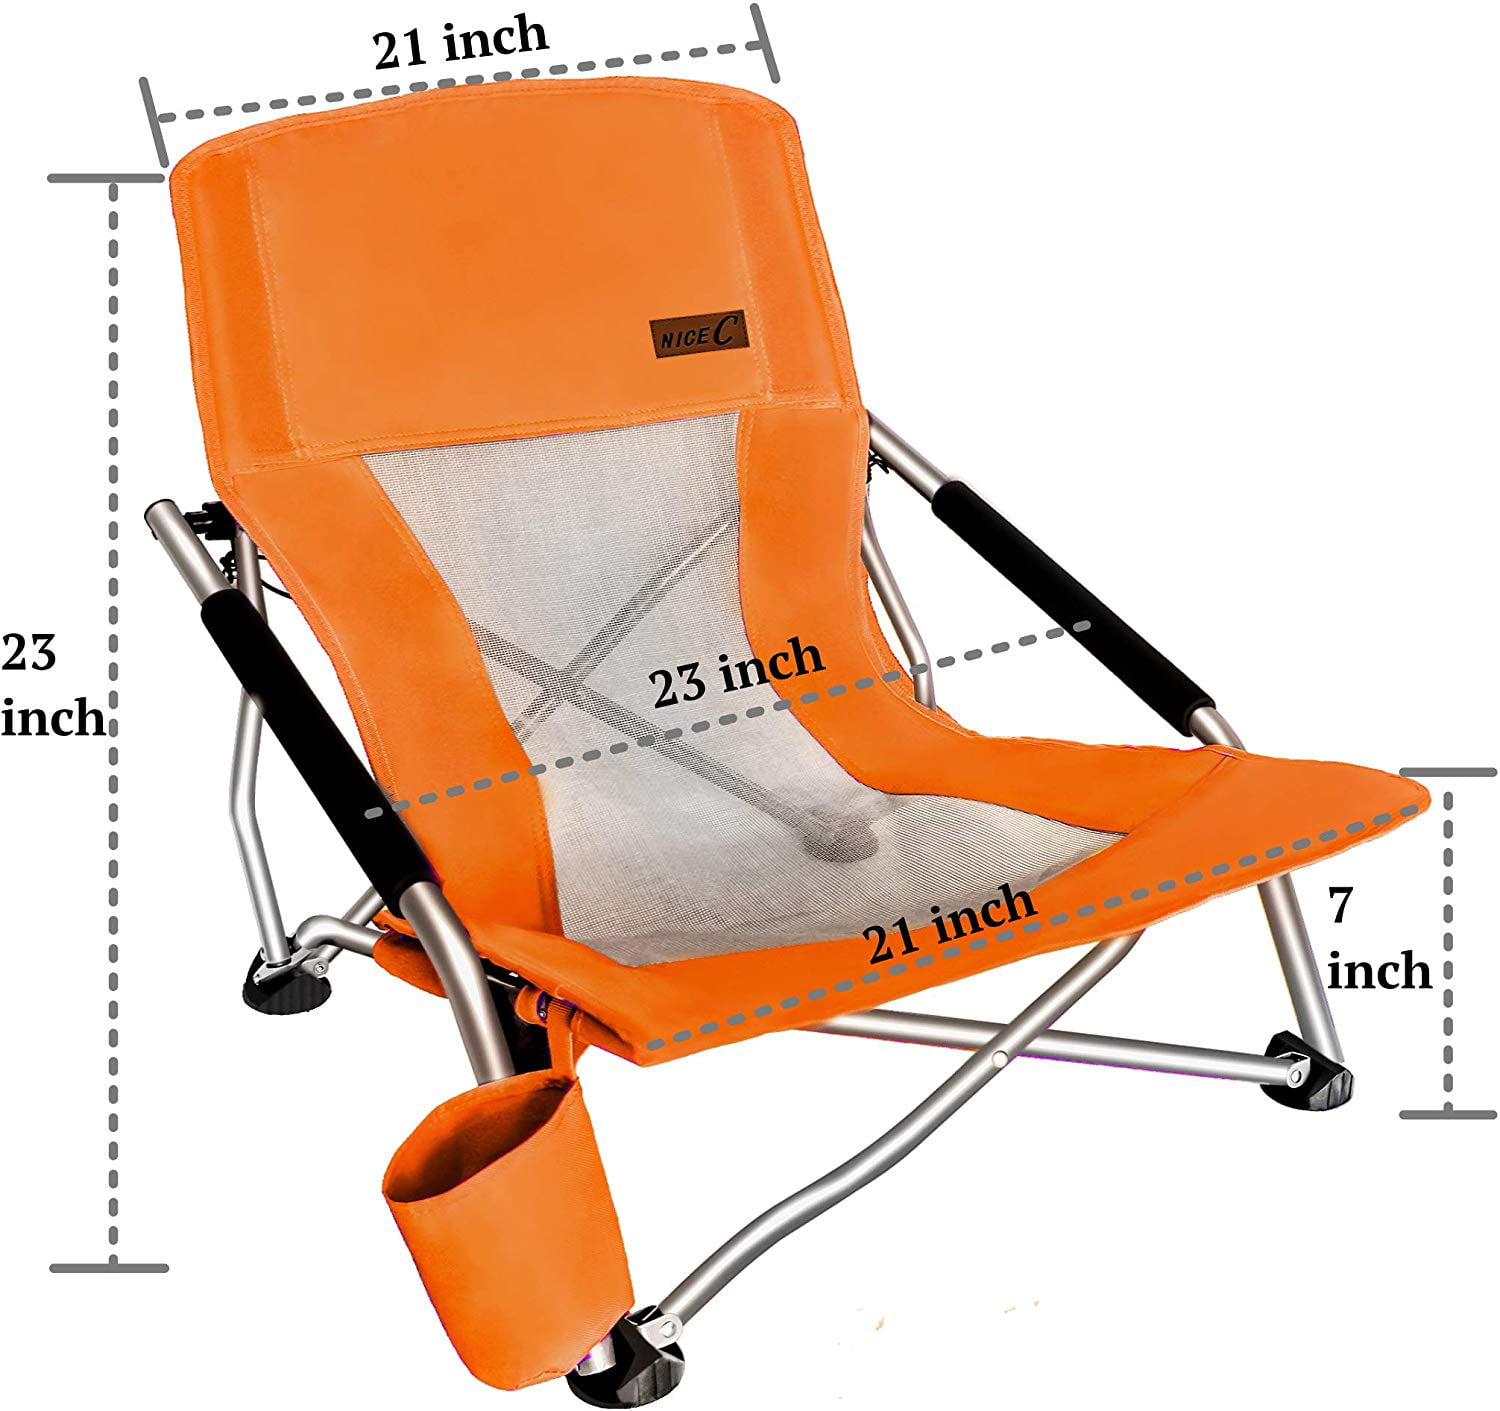 Folding Camping Chairs High Back outdoor Portable Fishing Chair UK black orange 